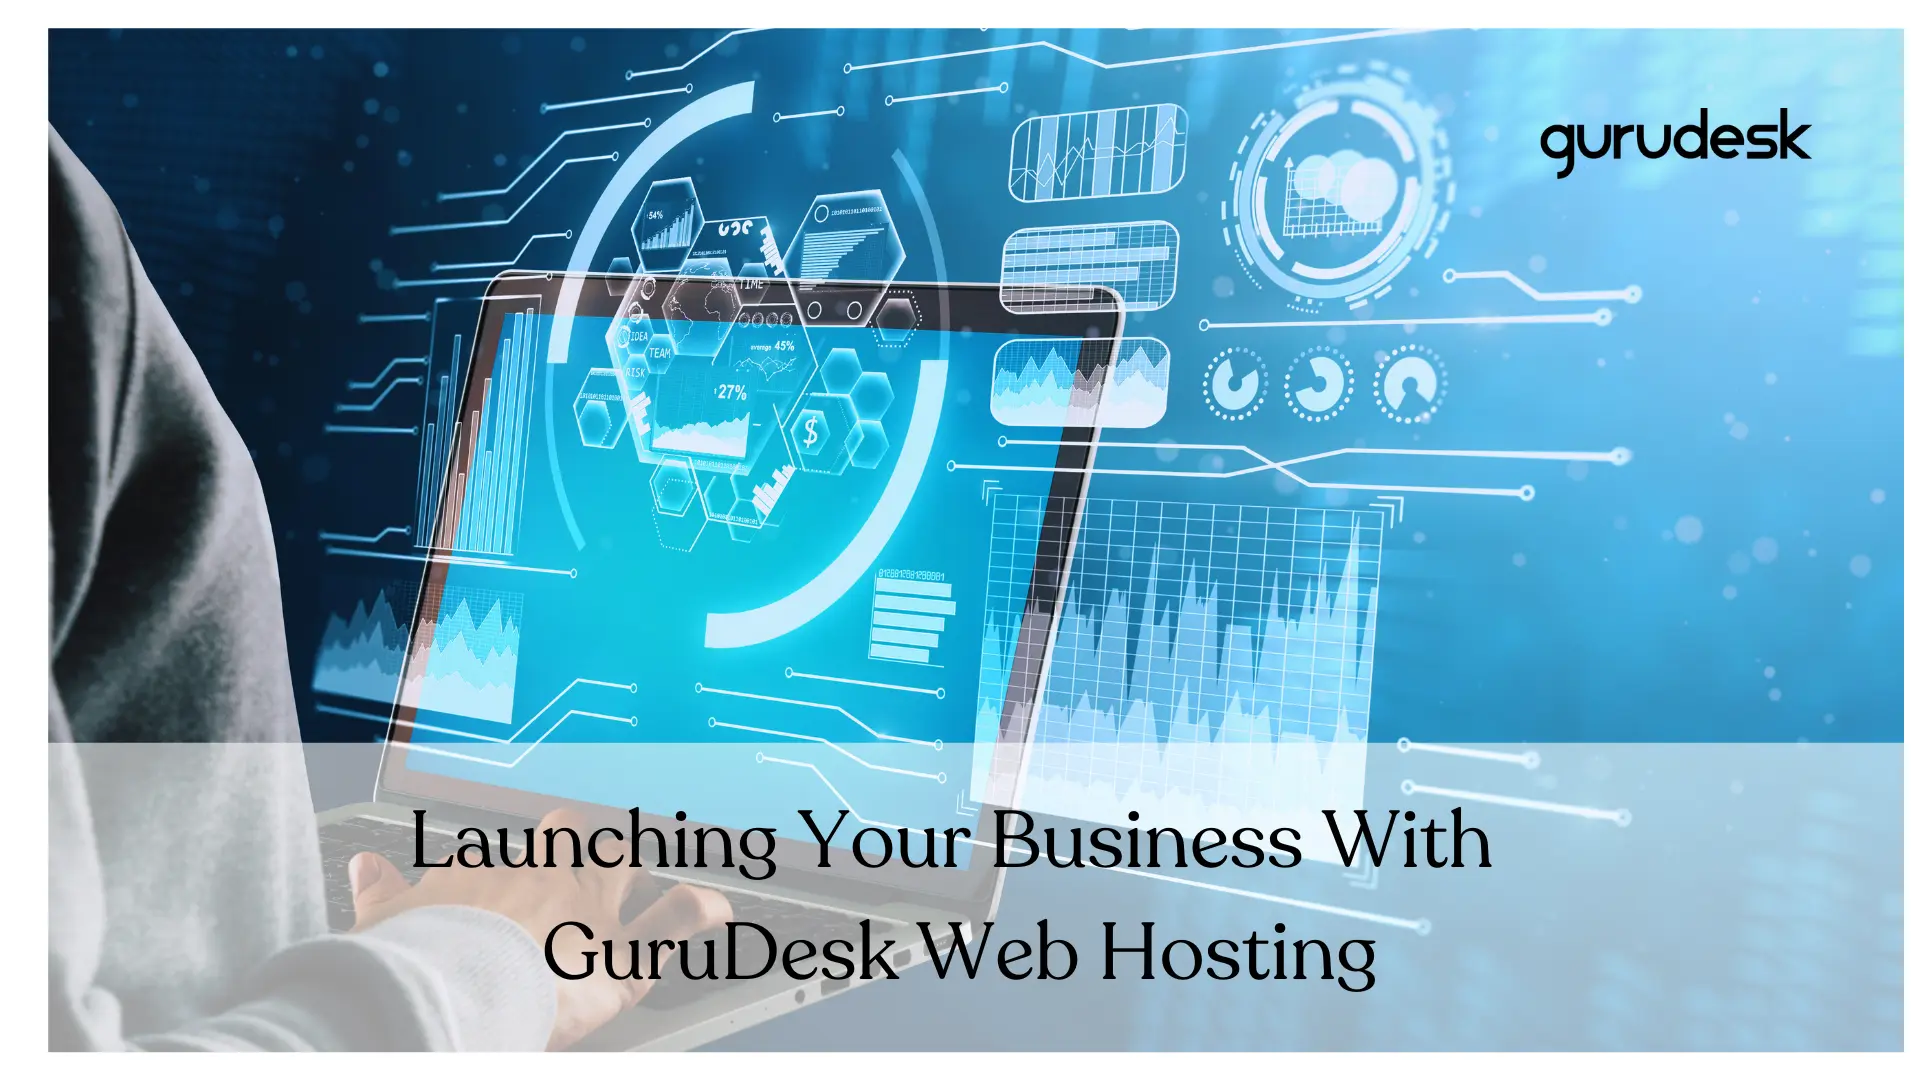 Launch your business with GuruDesk web hosting.